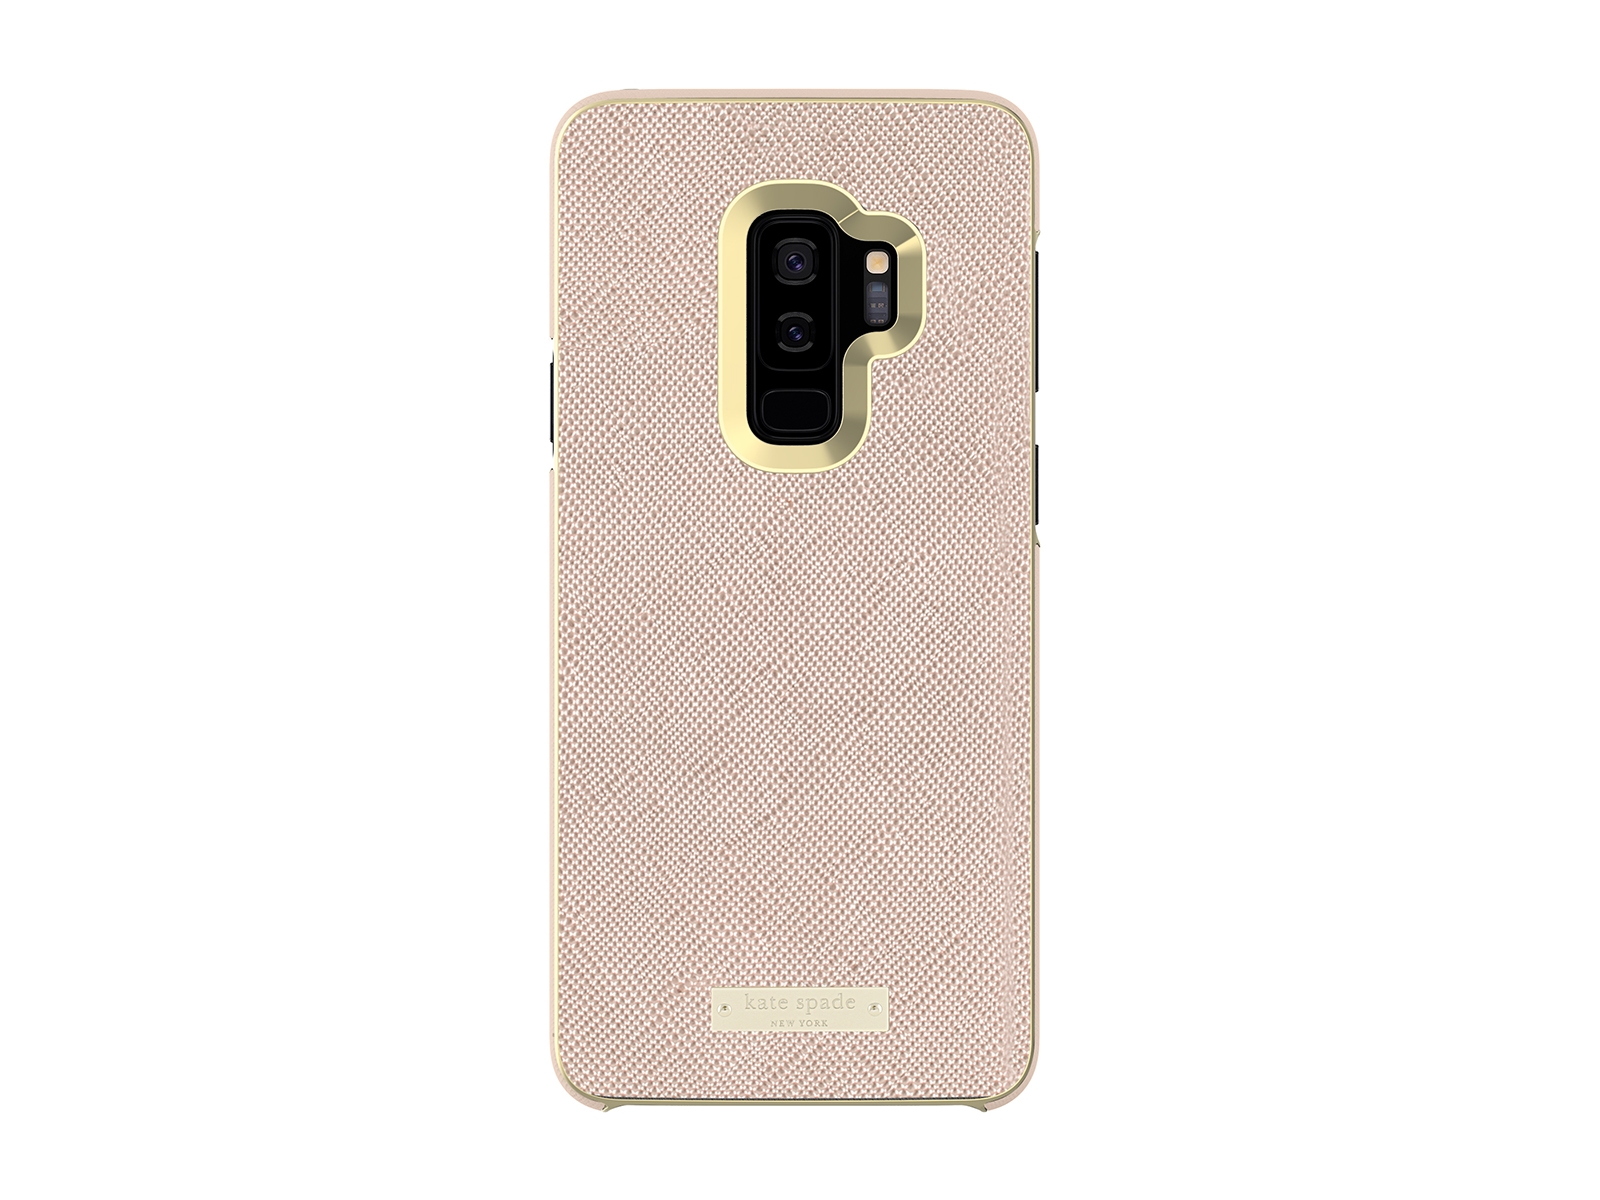 Thumbnail image of Kate Spade Wrap Inlay Case for Galaxy S9, Rose Gold